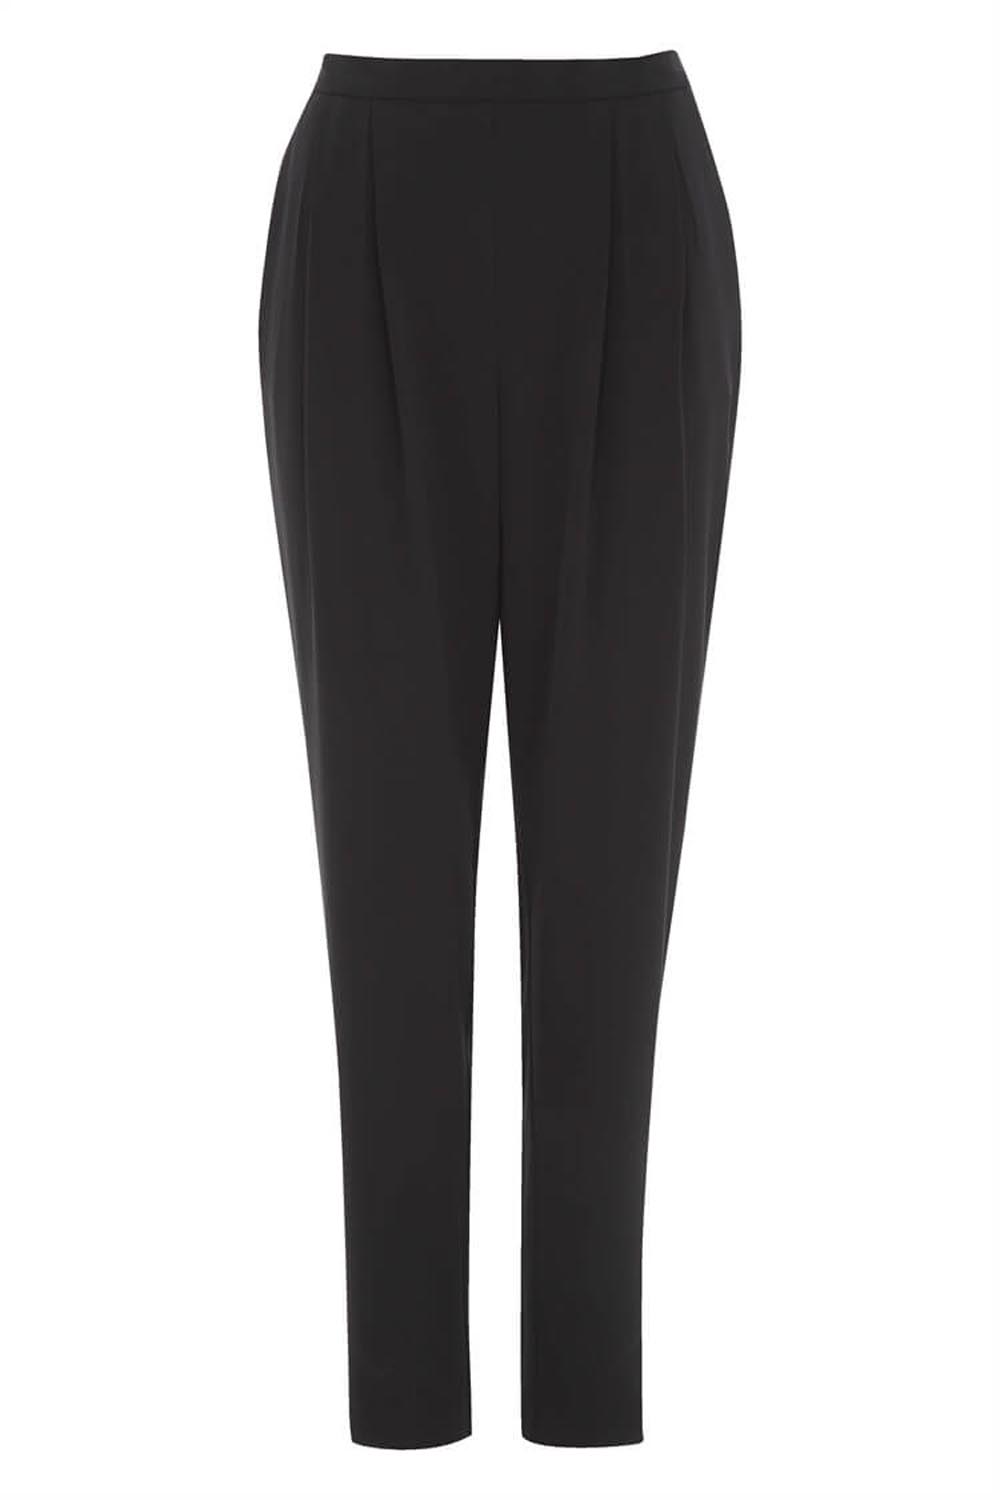 Black Tapered Harem Trousers, Image 4 of 4